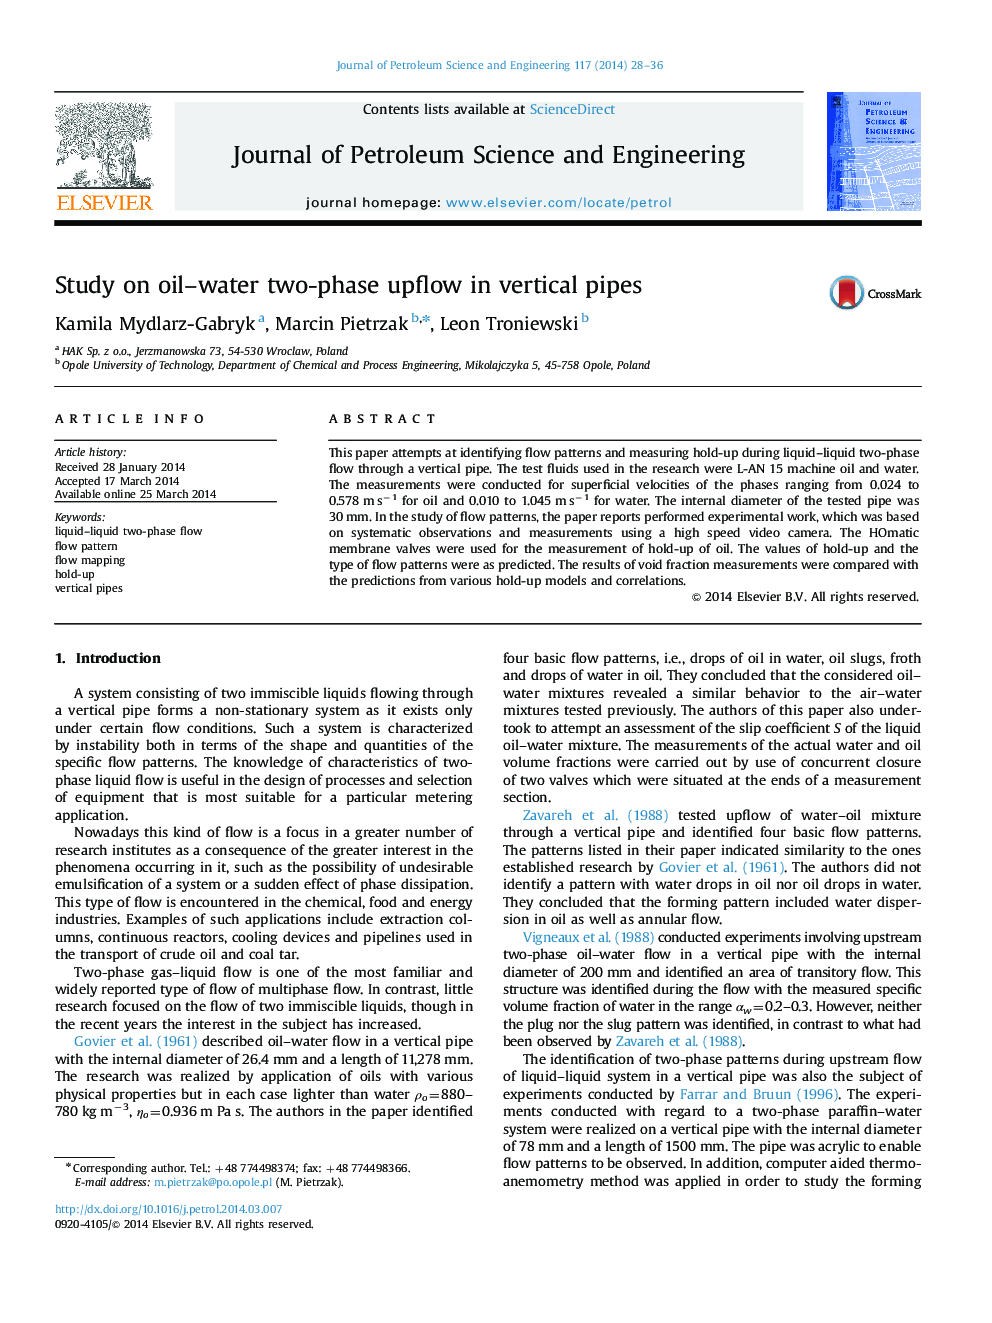 Study on oil-water two-phase upflow in vertical pipes